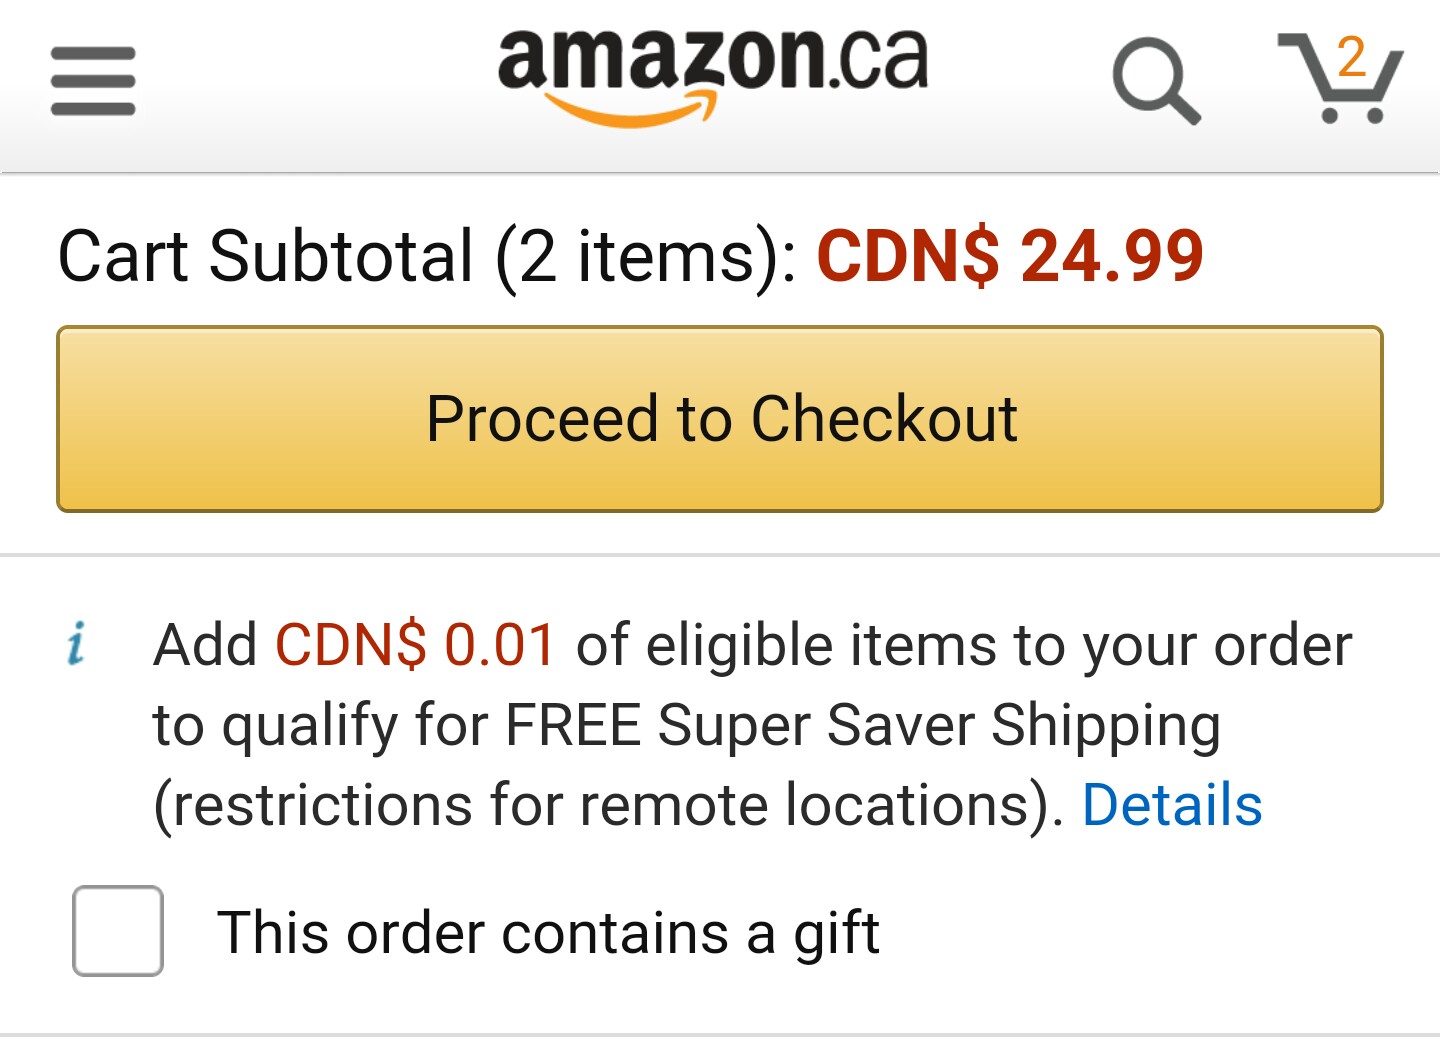 amazon co uk - amazon.ca Q Cart Subtotal 2 items Cdn$ 24.99 Proceed to Checkout i Add Cdn$ 0.01 of eligible items to your order to qualify for Free Super Saver Shipping restrictions for remote locations. Details This order contains a gift